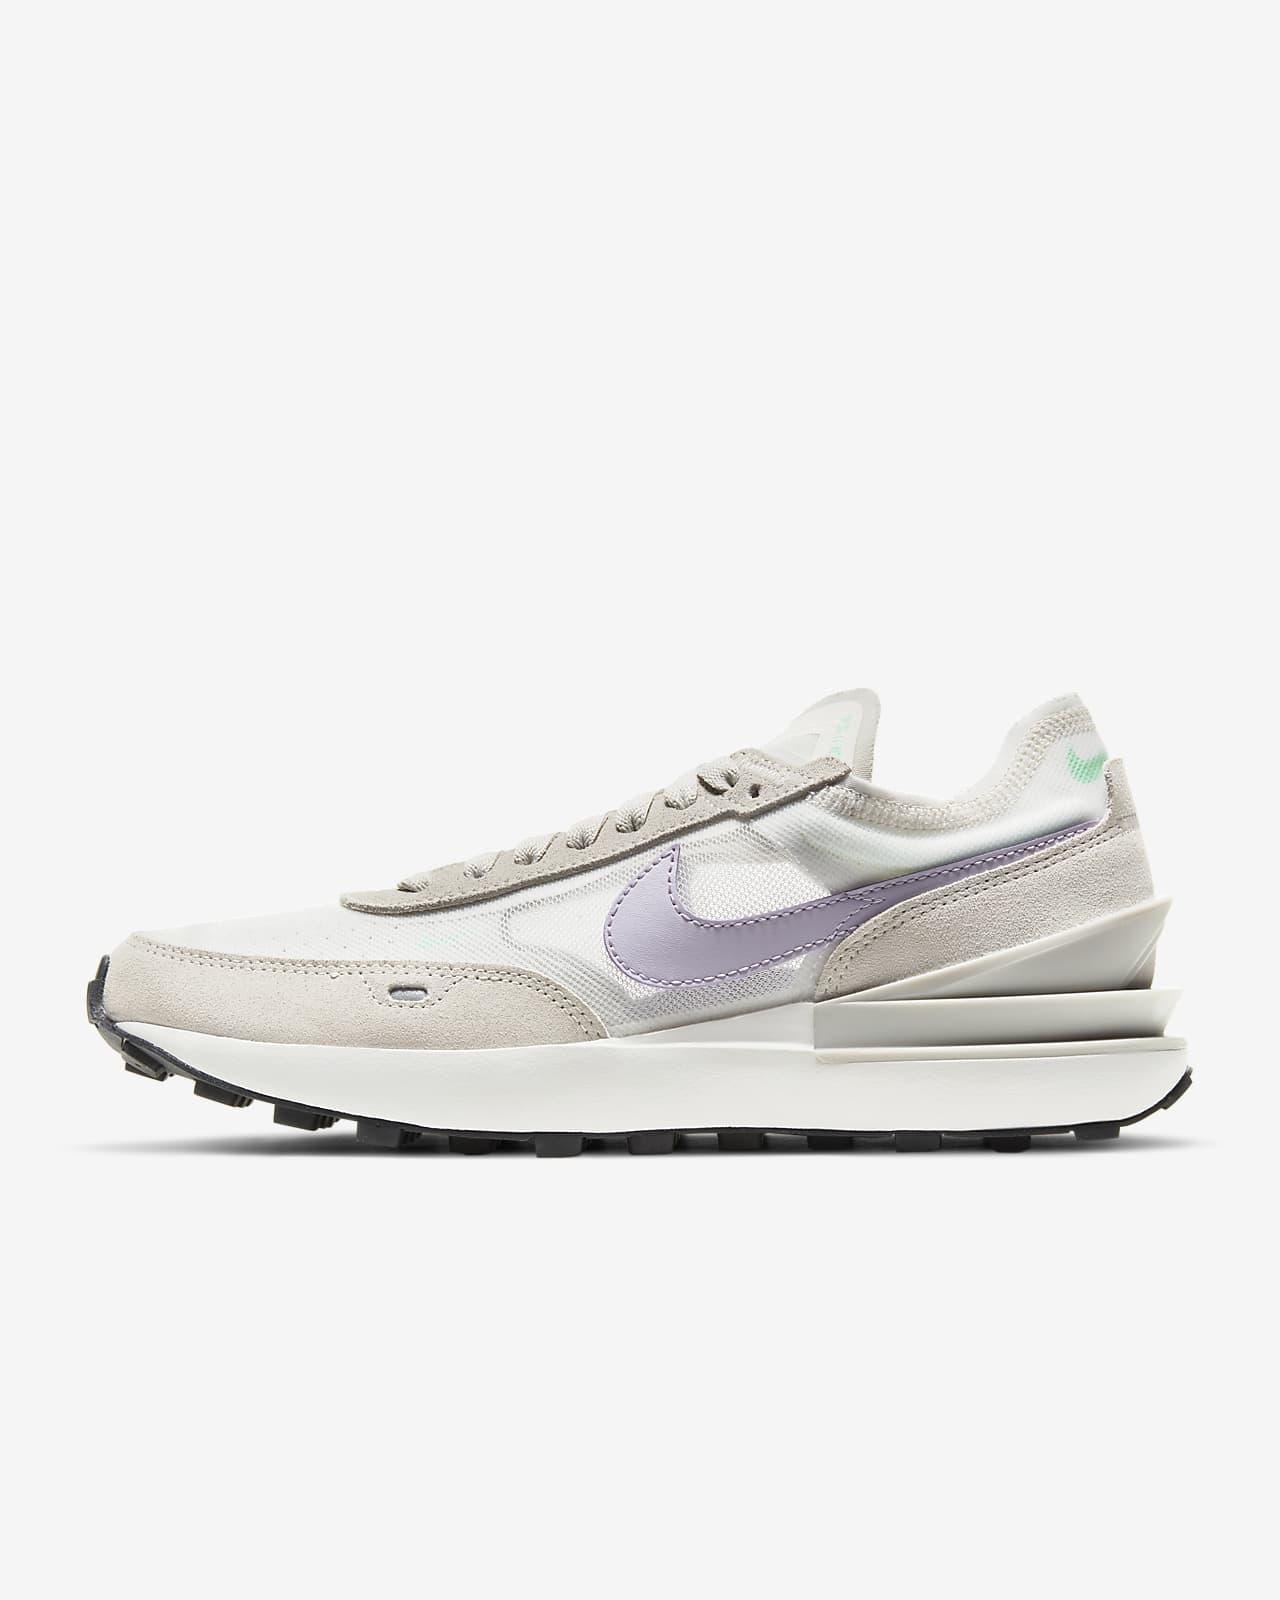 Nike Waffle One Men's Shoes | lupon.gov.ph